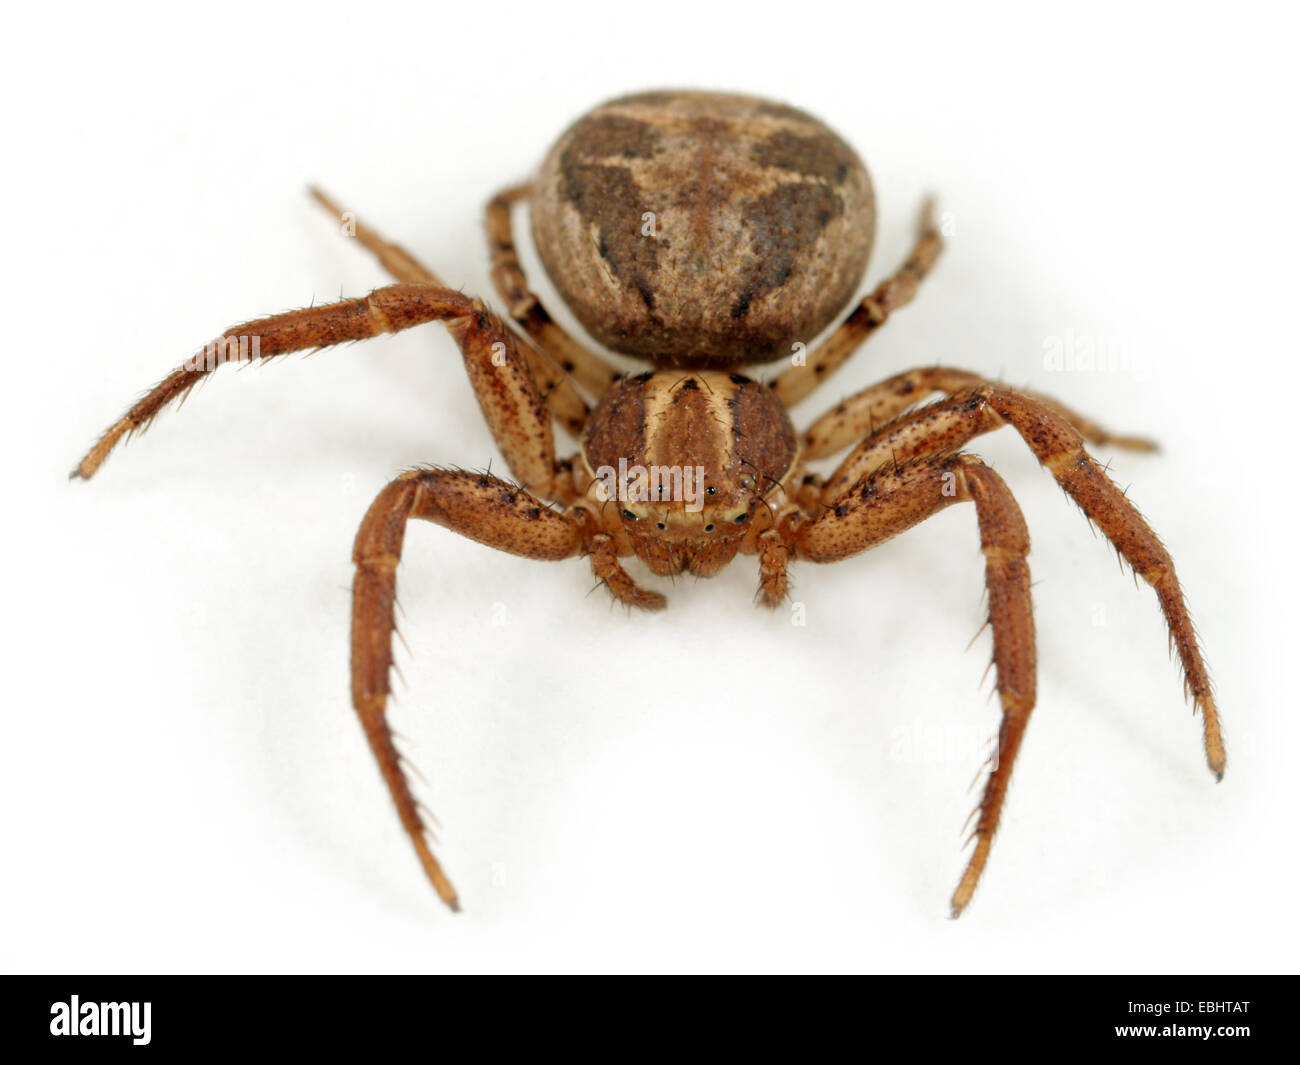 Female Crab spider (Xysticus cristatus) on white background. Crab spiders aree part of the family Thomisidae. Stock Photo